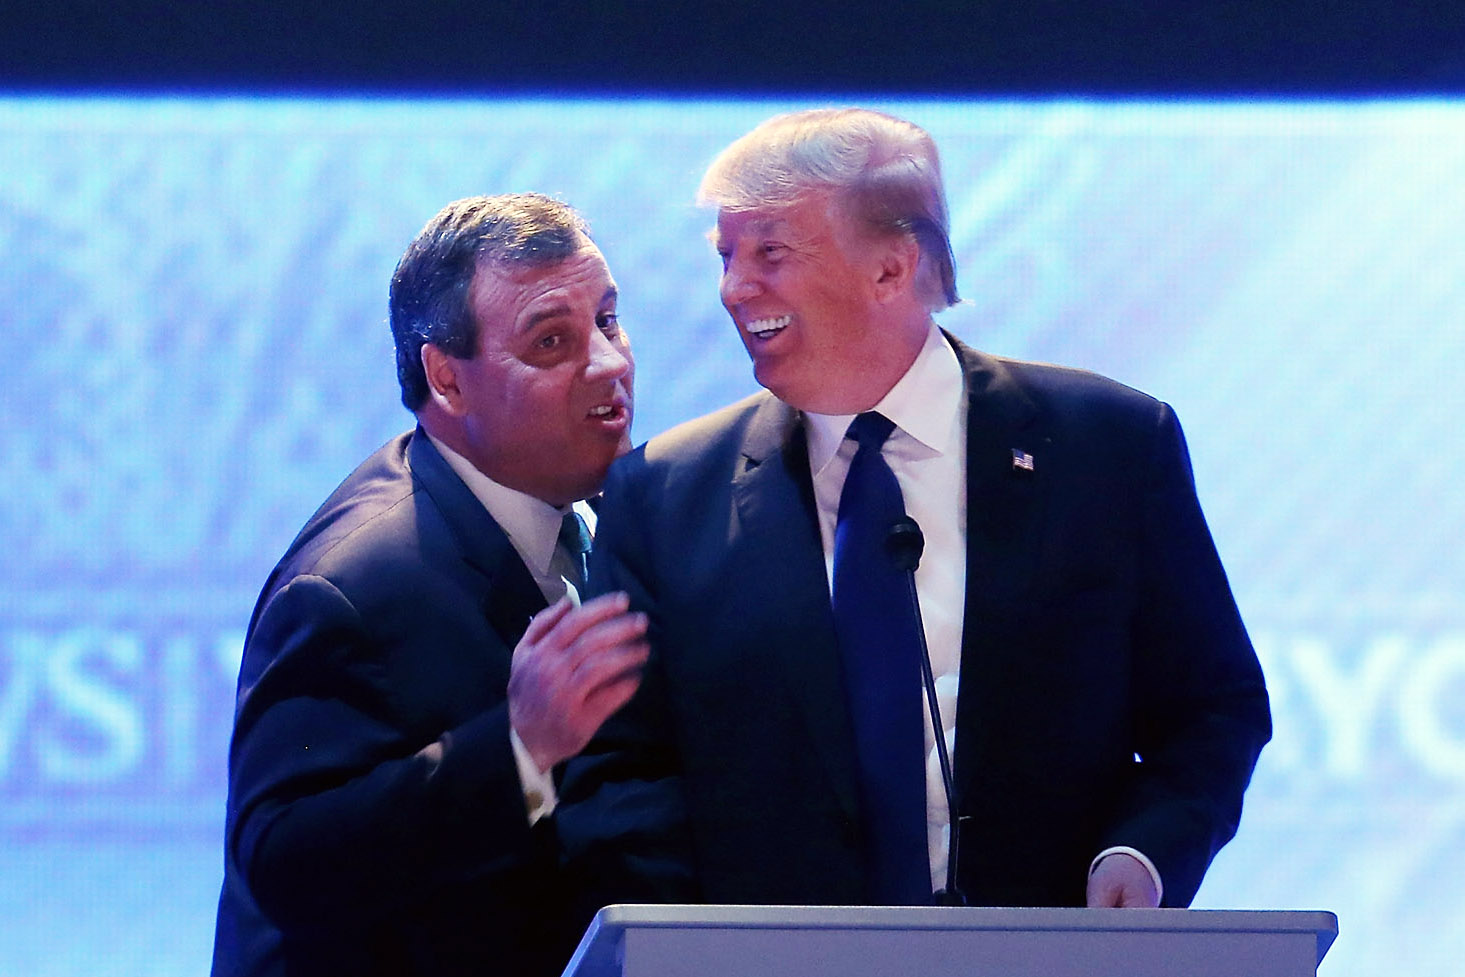 New Jersey Gov. Chris Christie endorsed business Donald Trump for president on Feb. 26. Here, the candidates greeted each other during a commercial break in a Feb. 6 Republican presidential debate.